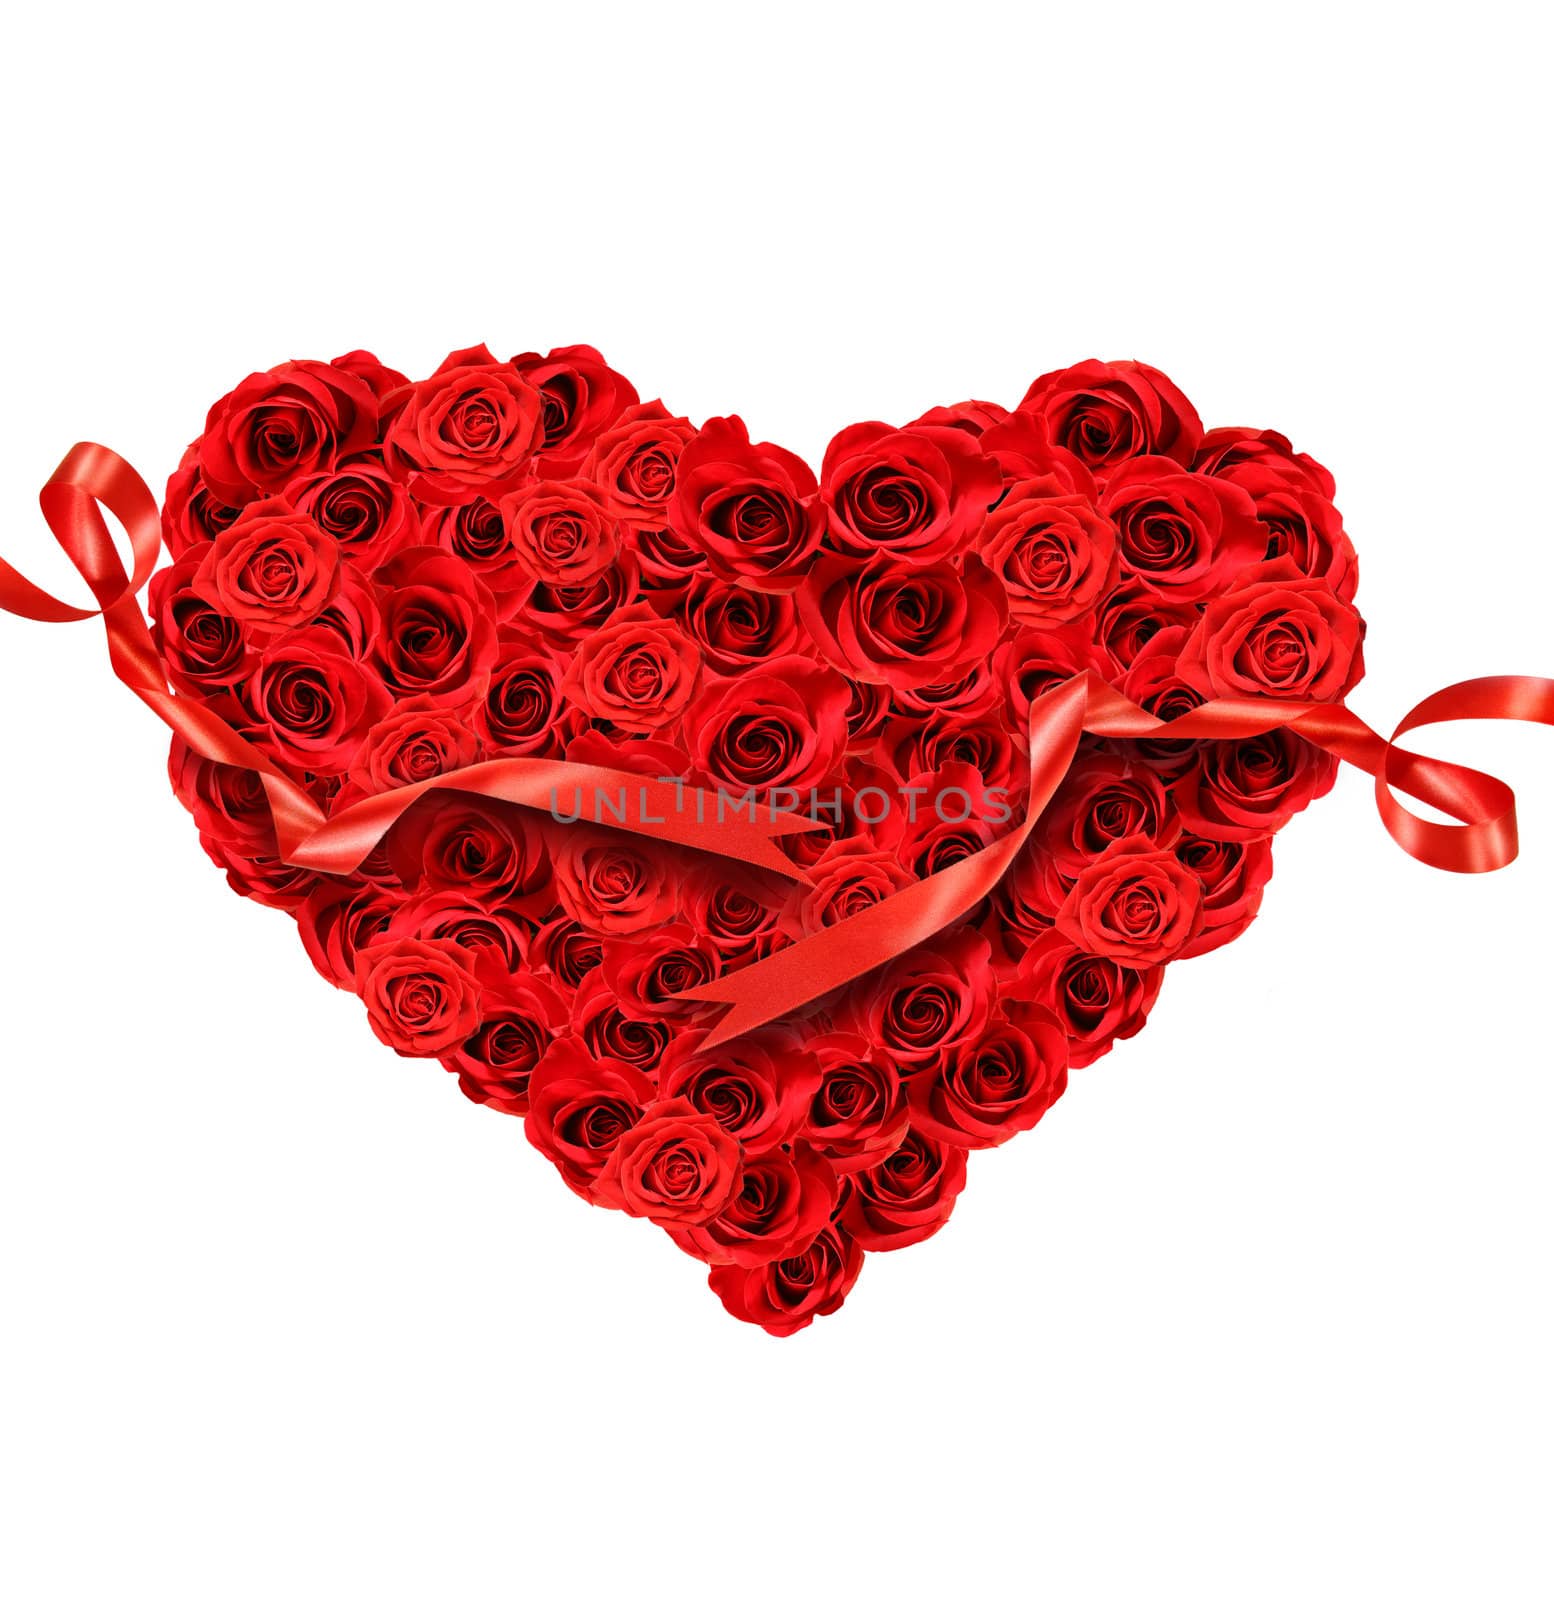 Red roses in the shape of heart on white background